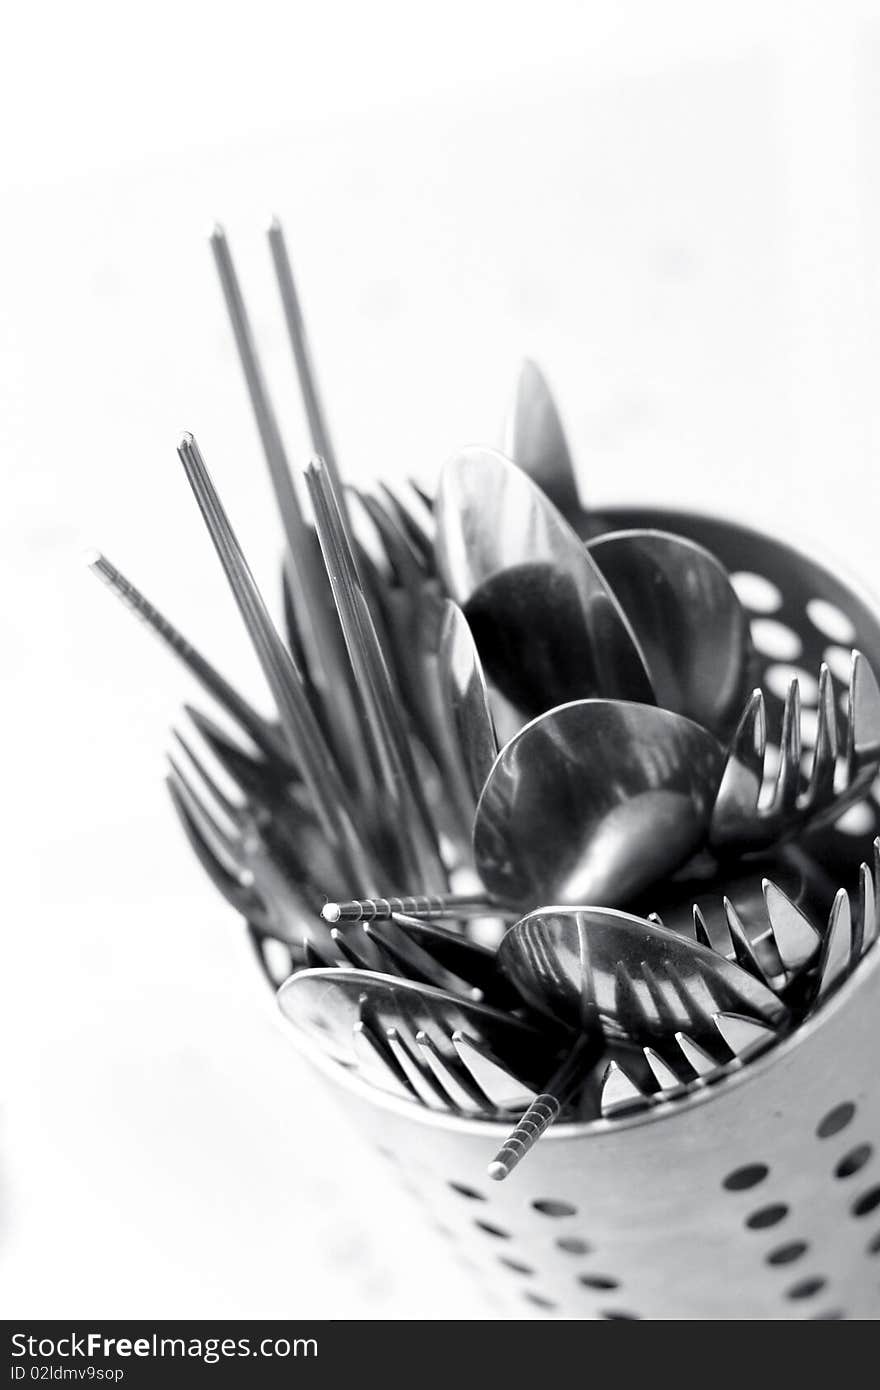 Forks, Spoons and chopsticks in the silver basket on white background